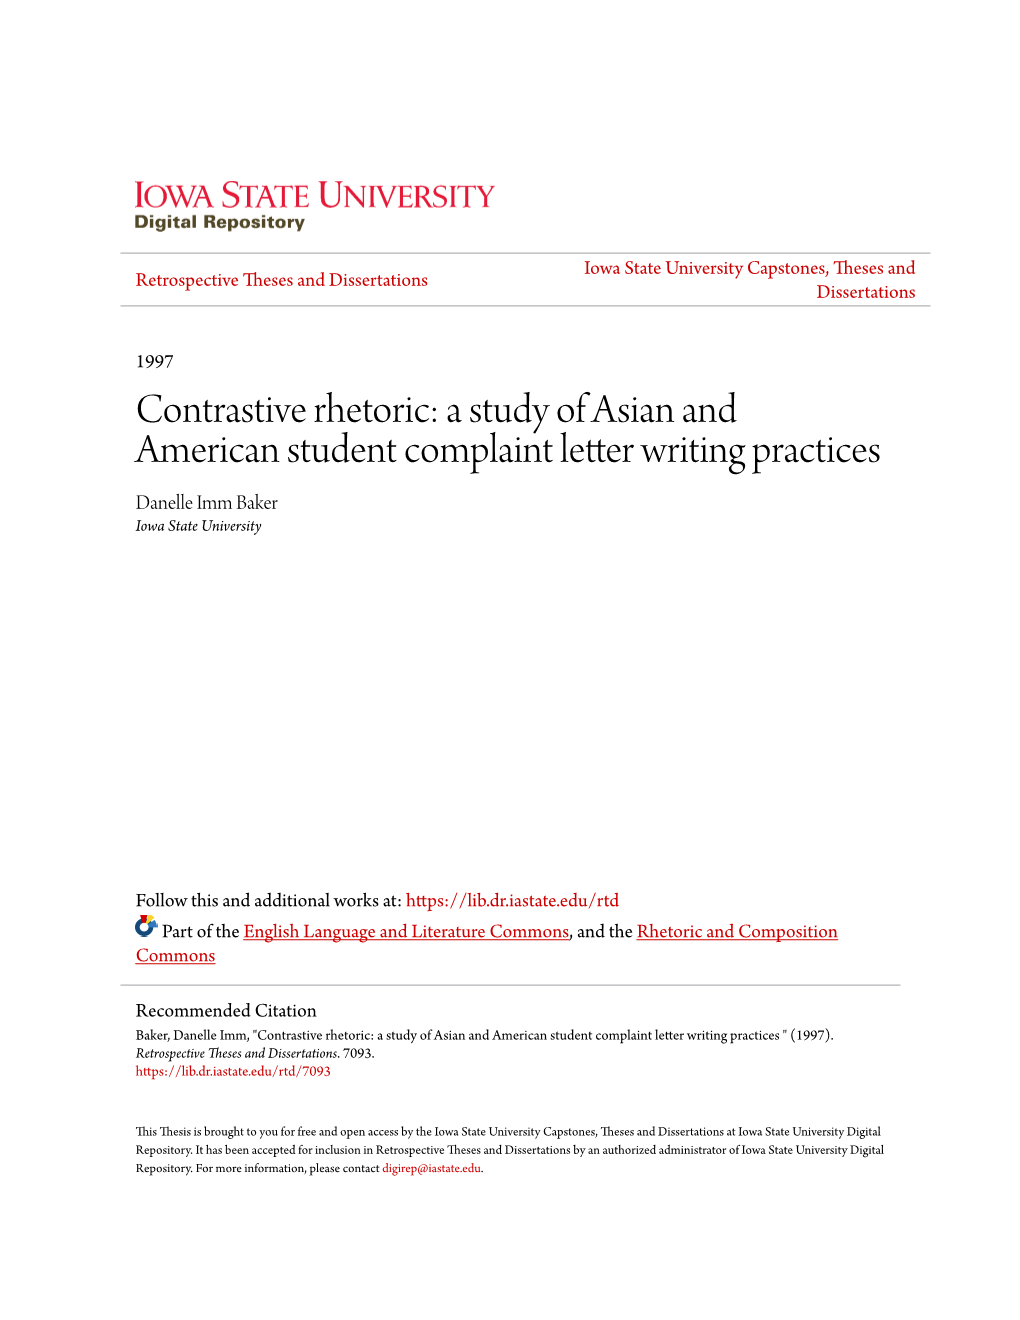 Contrastive Rhetoric: a Study of Asian and American Student Complaint Letter Writing Practices Danelle Imm Baker Iowa State University